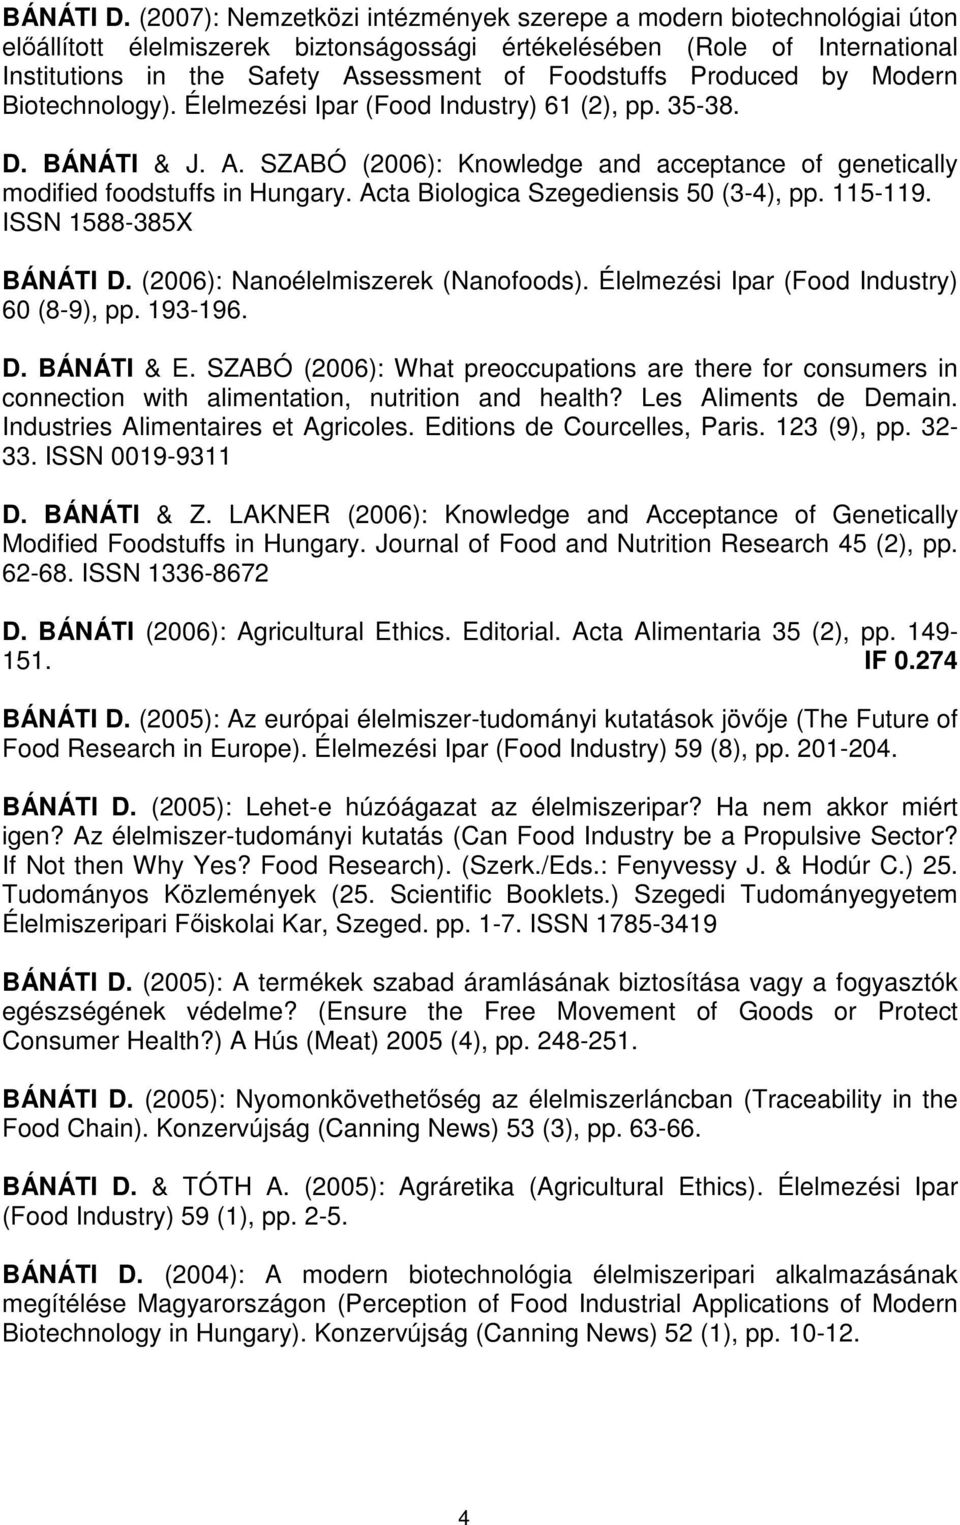 Produced by Modern Biotechnology). Élelmezési Ipar (Food Industry) 61 (2), pp. 35-38. D. BÁNÁTI & J. A. SZABÓ (2006): Knowledge and acceptance of genetically modified foodstuffs in Hungary.